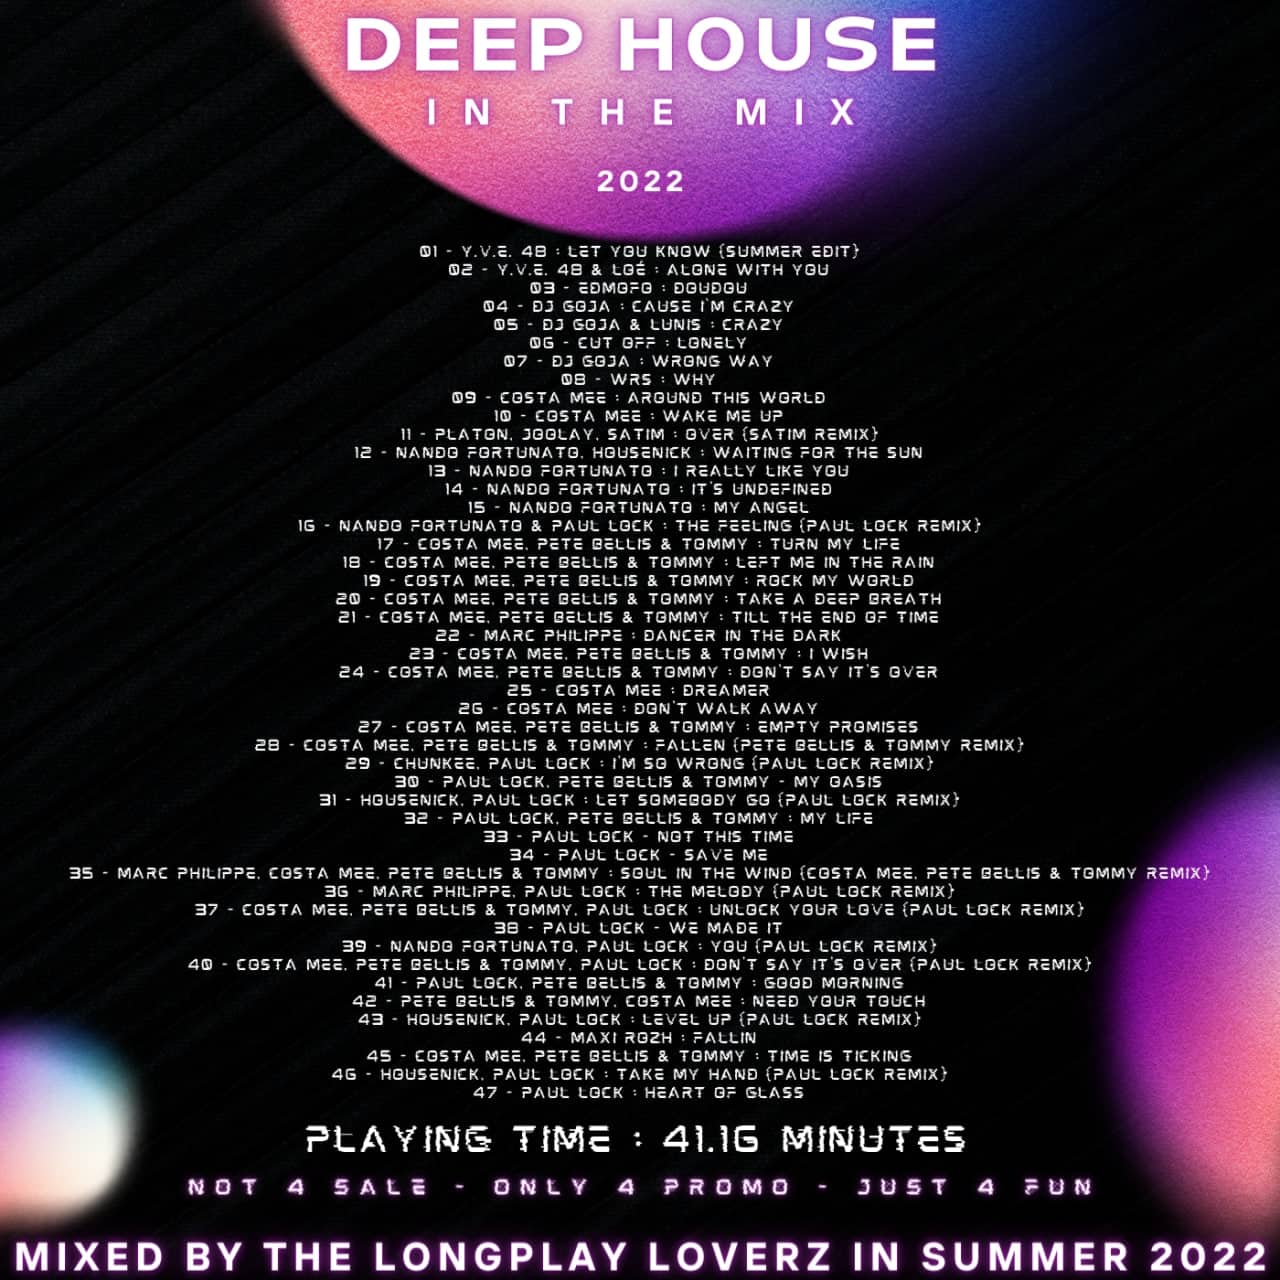 2022 - Deep House Mix Vol.1 Then Longplay Loverz In Summer 2022 5403_cbace70763ab